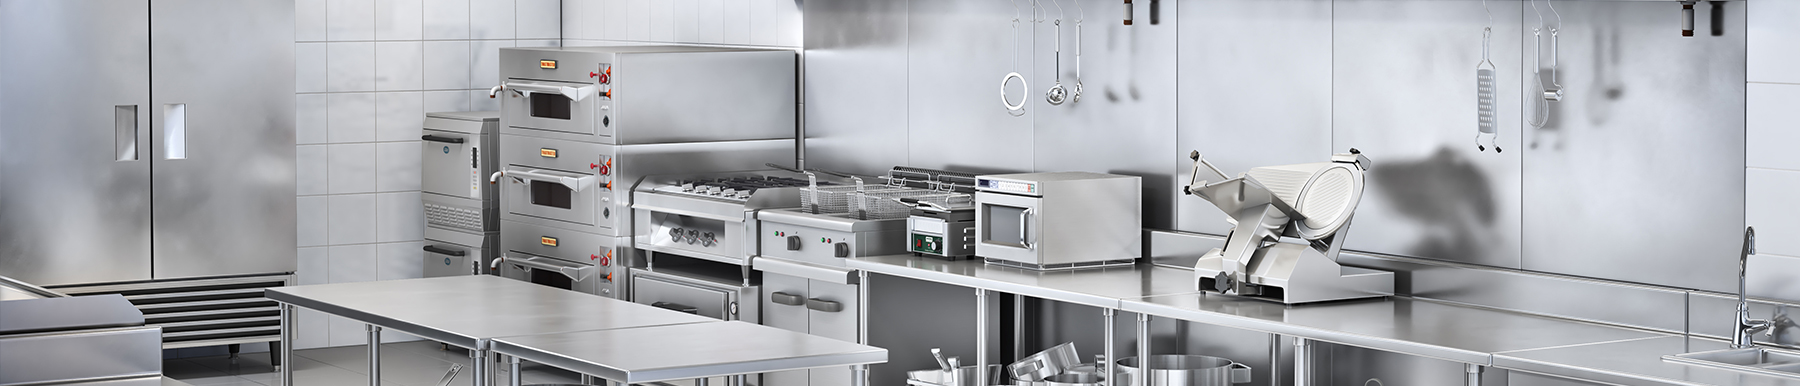 Catering Equipment Suppliers Near Cherwell | H2 Catering Equipment Catering Equipment